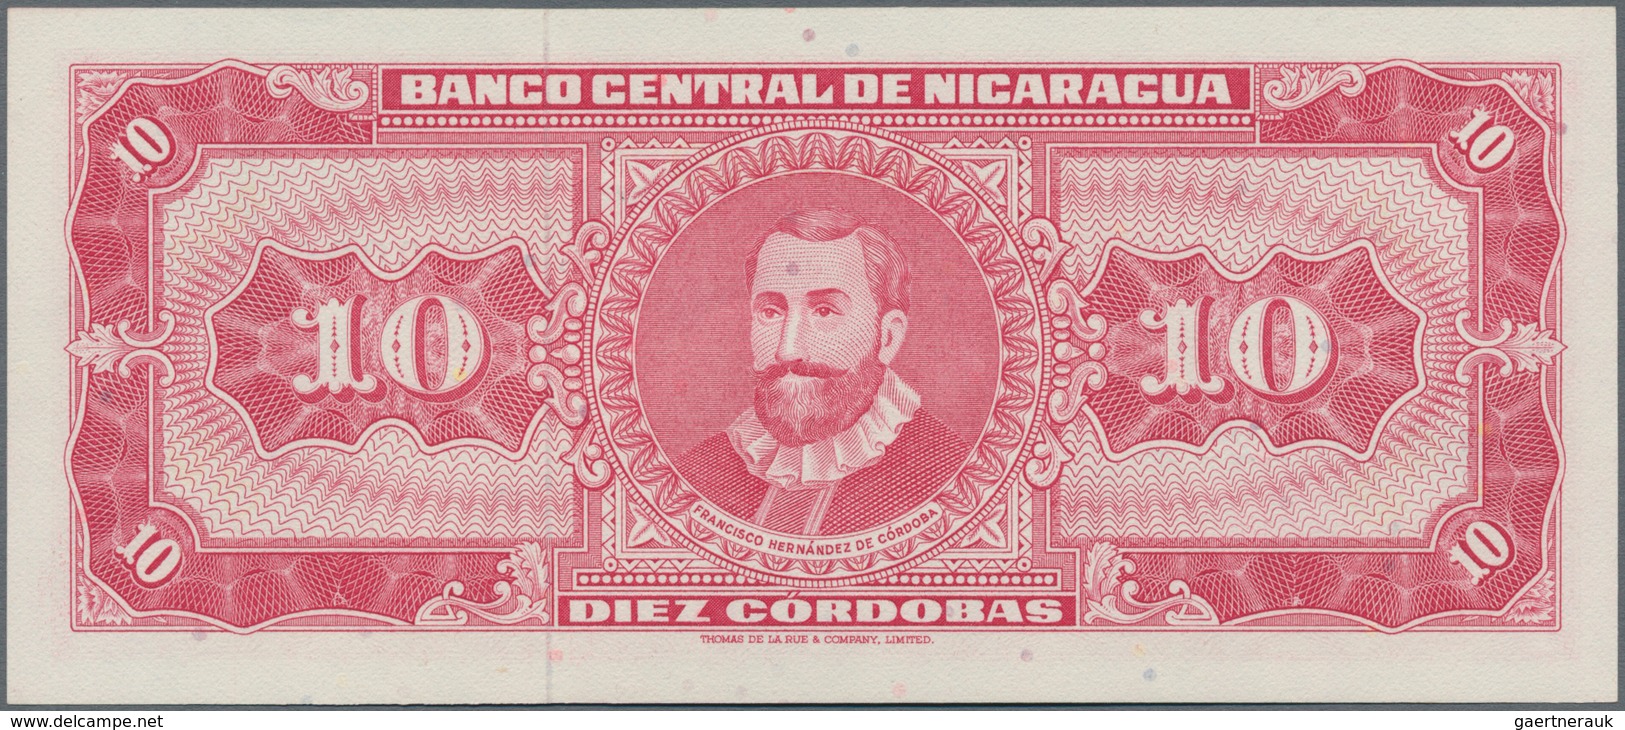 Nicaragua: 10 Cordobas 1968, P.117 With Serial Number 00000128 In UNC Condition. - Nicaragua